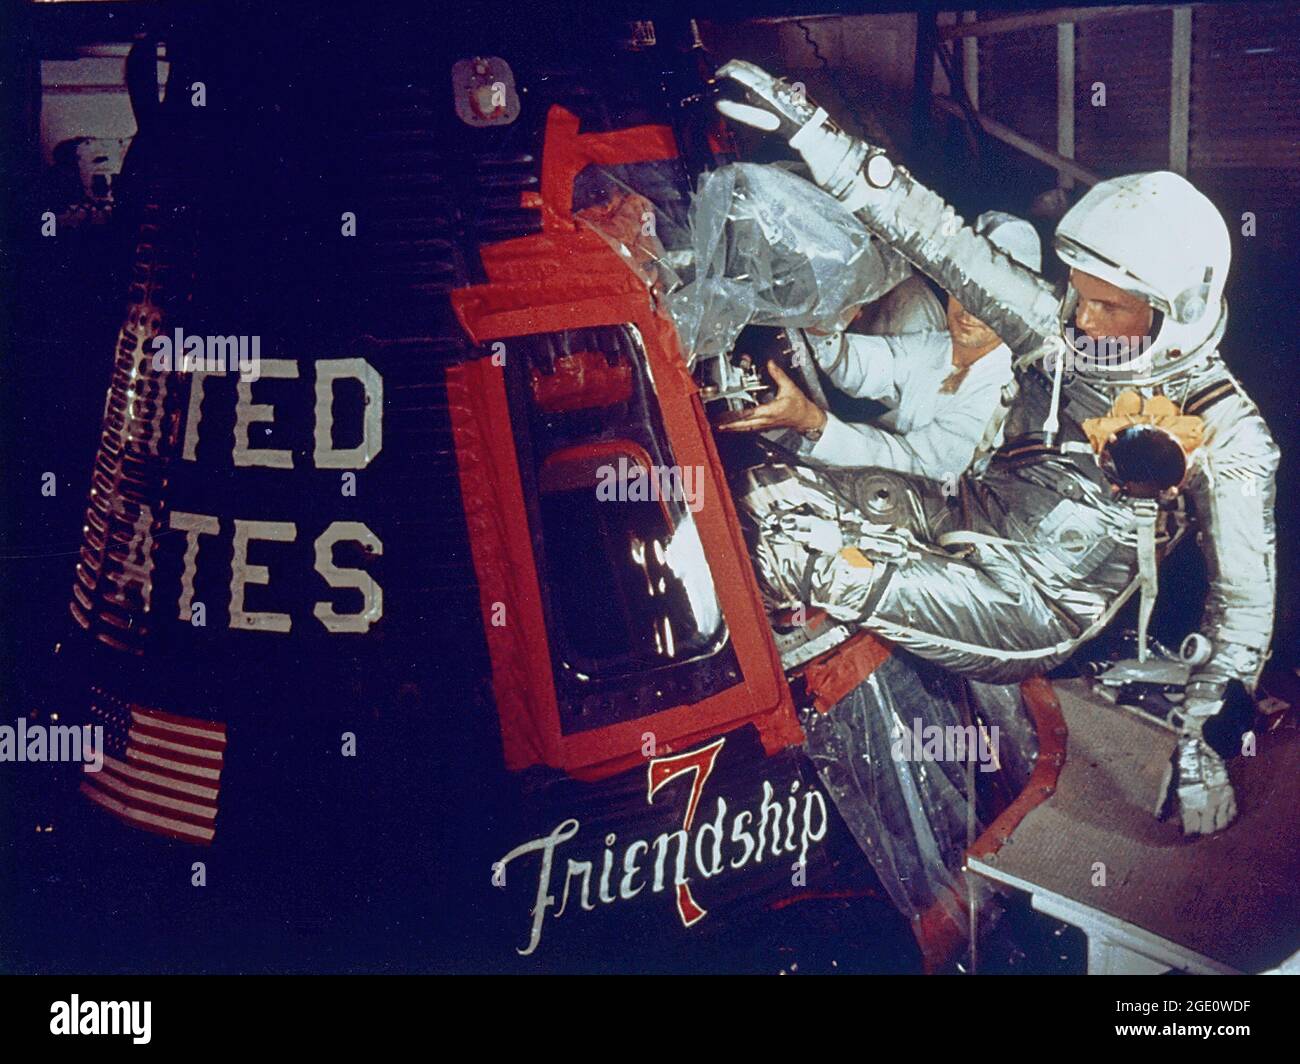 Friendship 7 At 9:47 am EST, John Glenn launched from Cape Canaveral's Launch Complex 14 to become the first American to orbit the Earth. In this image, Glenn enters his Friendship 7 capsule with assistance from technicians to begin his historic flight. Stock Photo